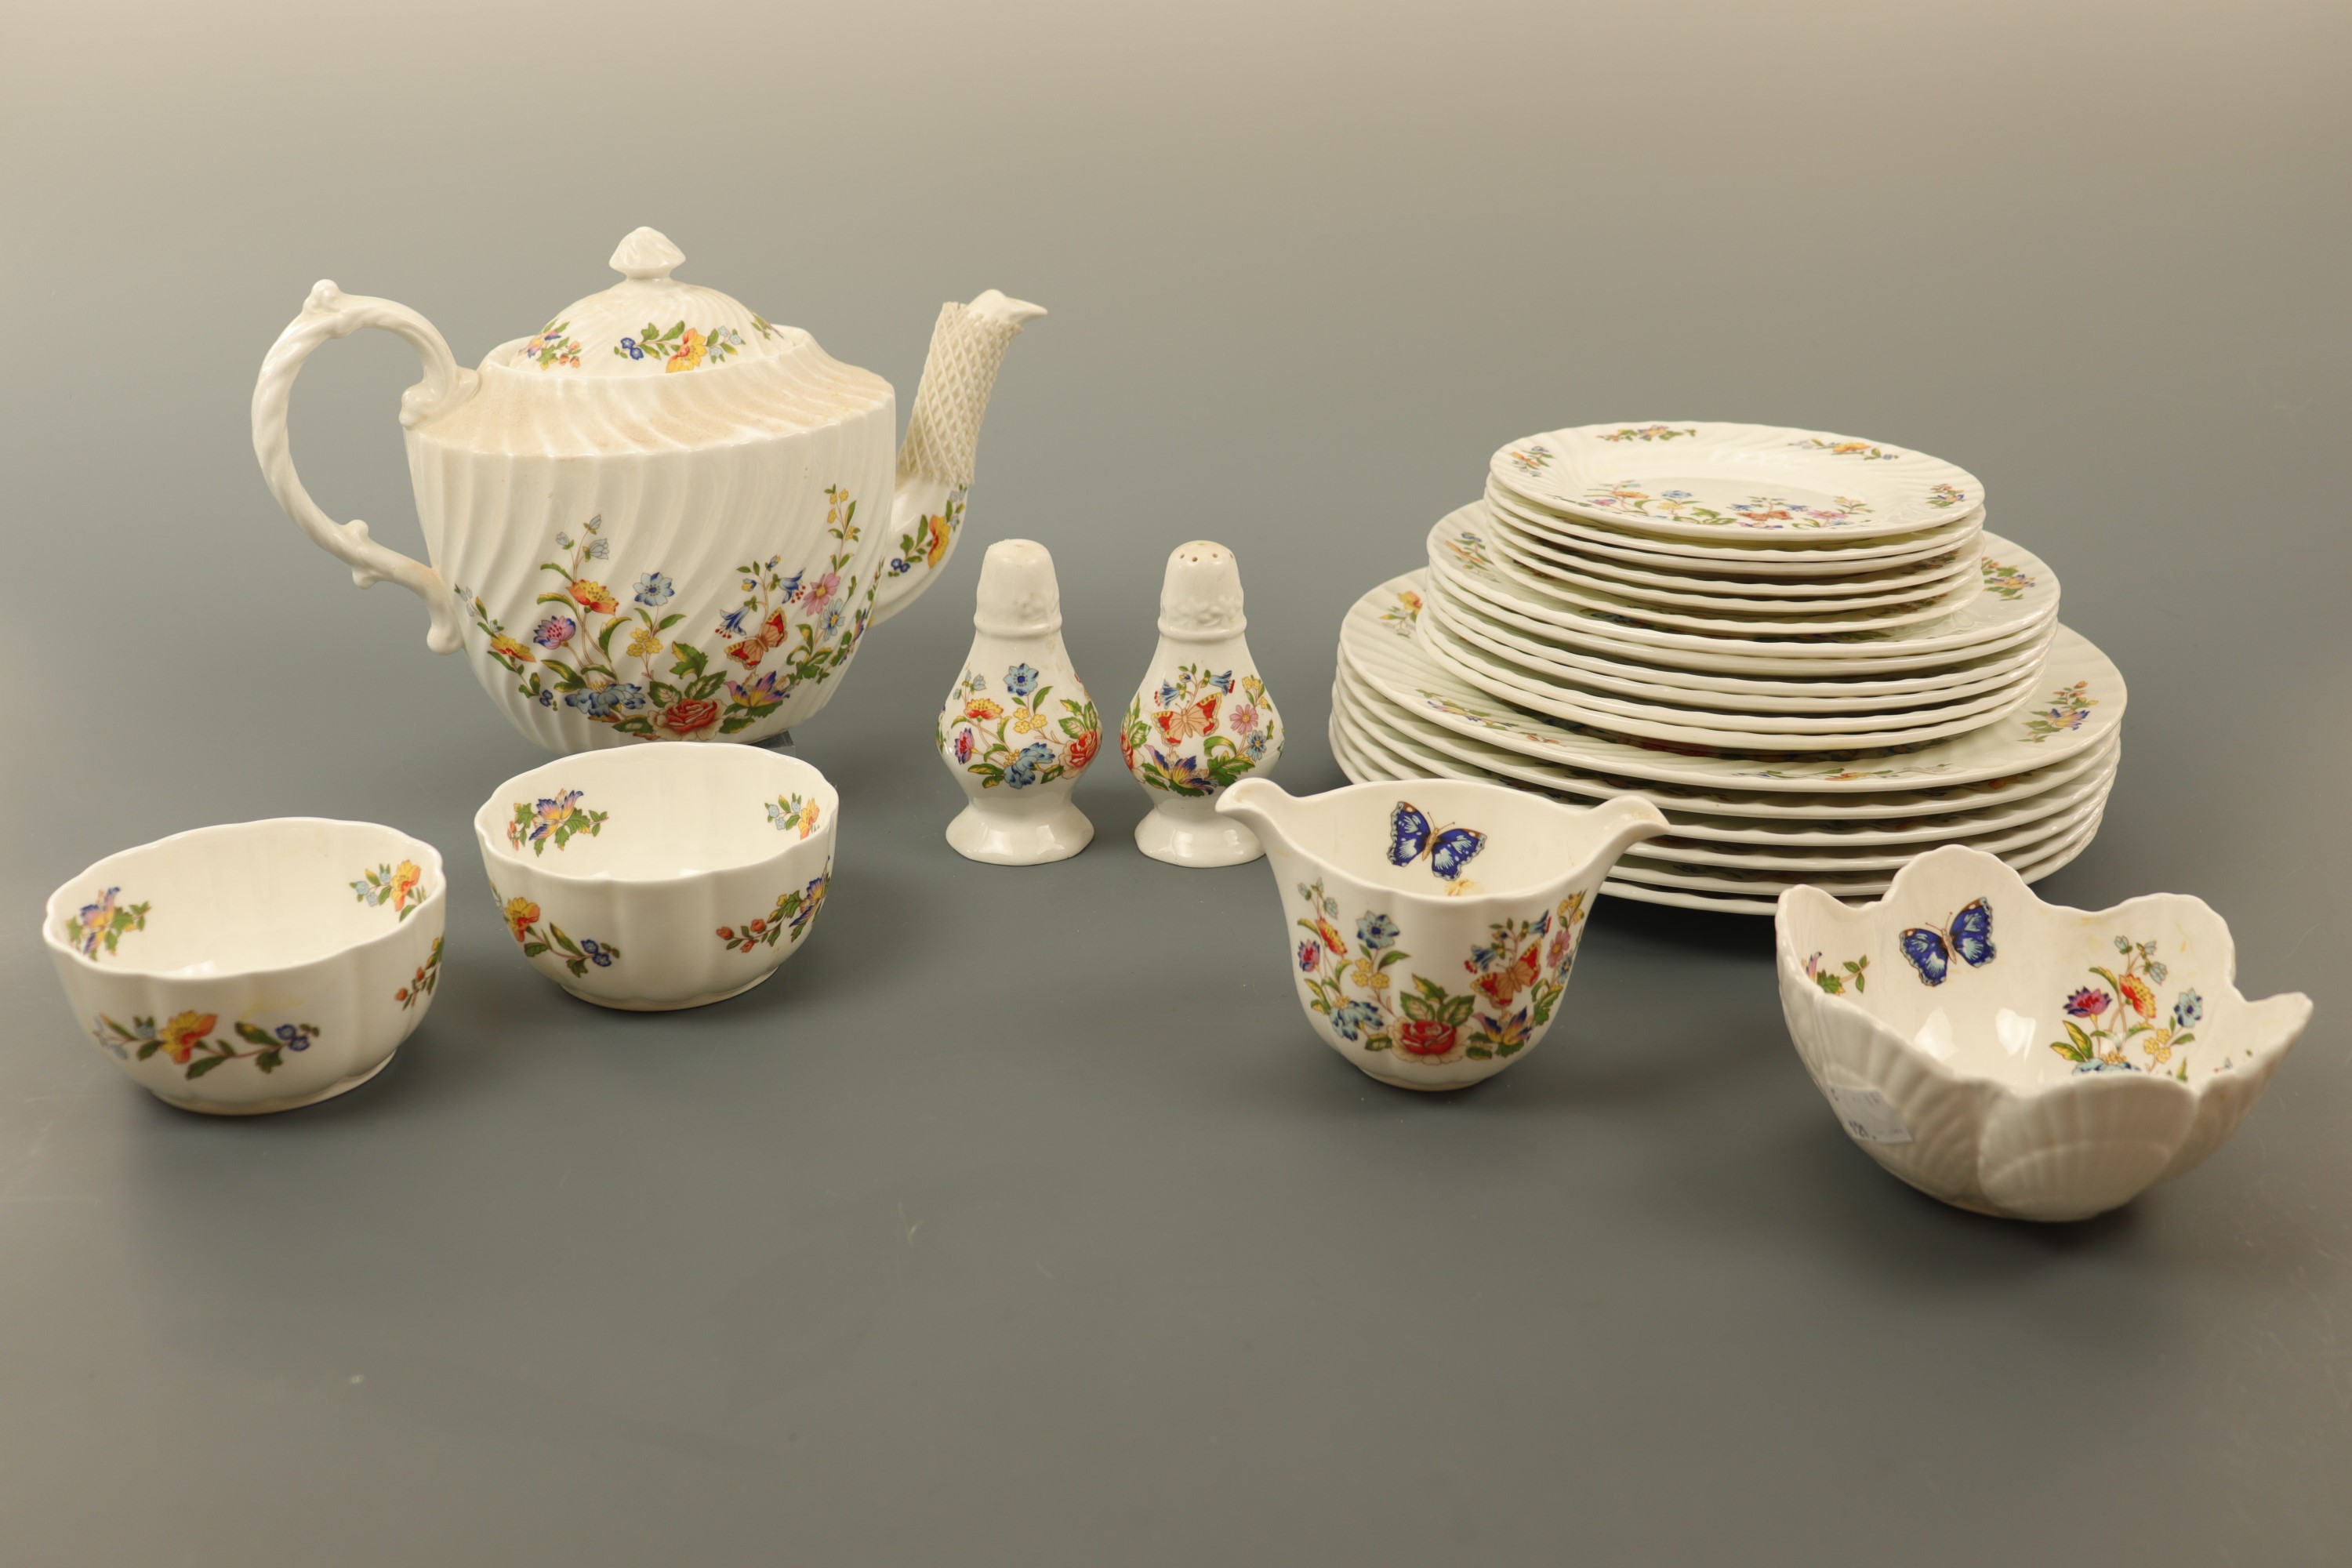 Aynsley "Cottage Garden" tea and dinnerware, approximately 40 items (free of damage)